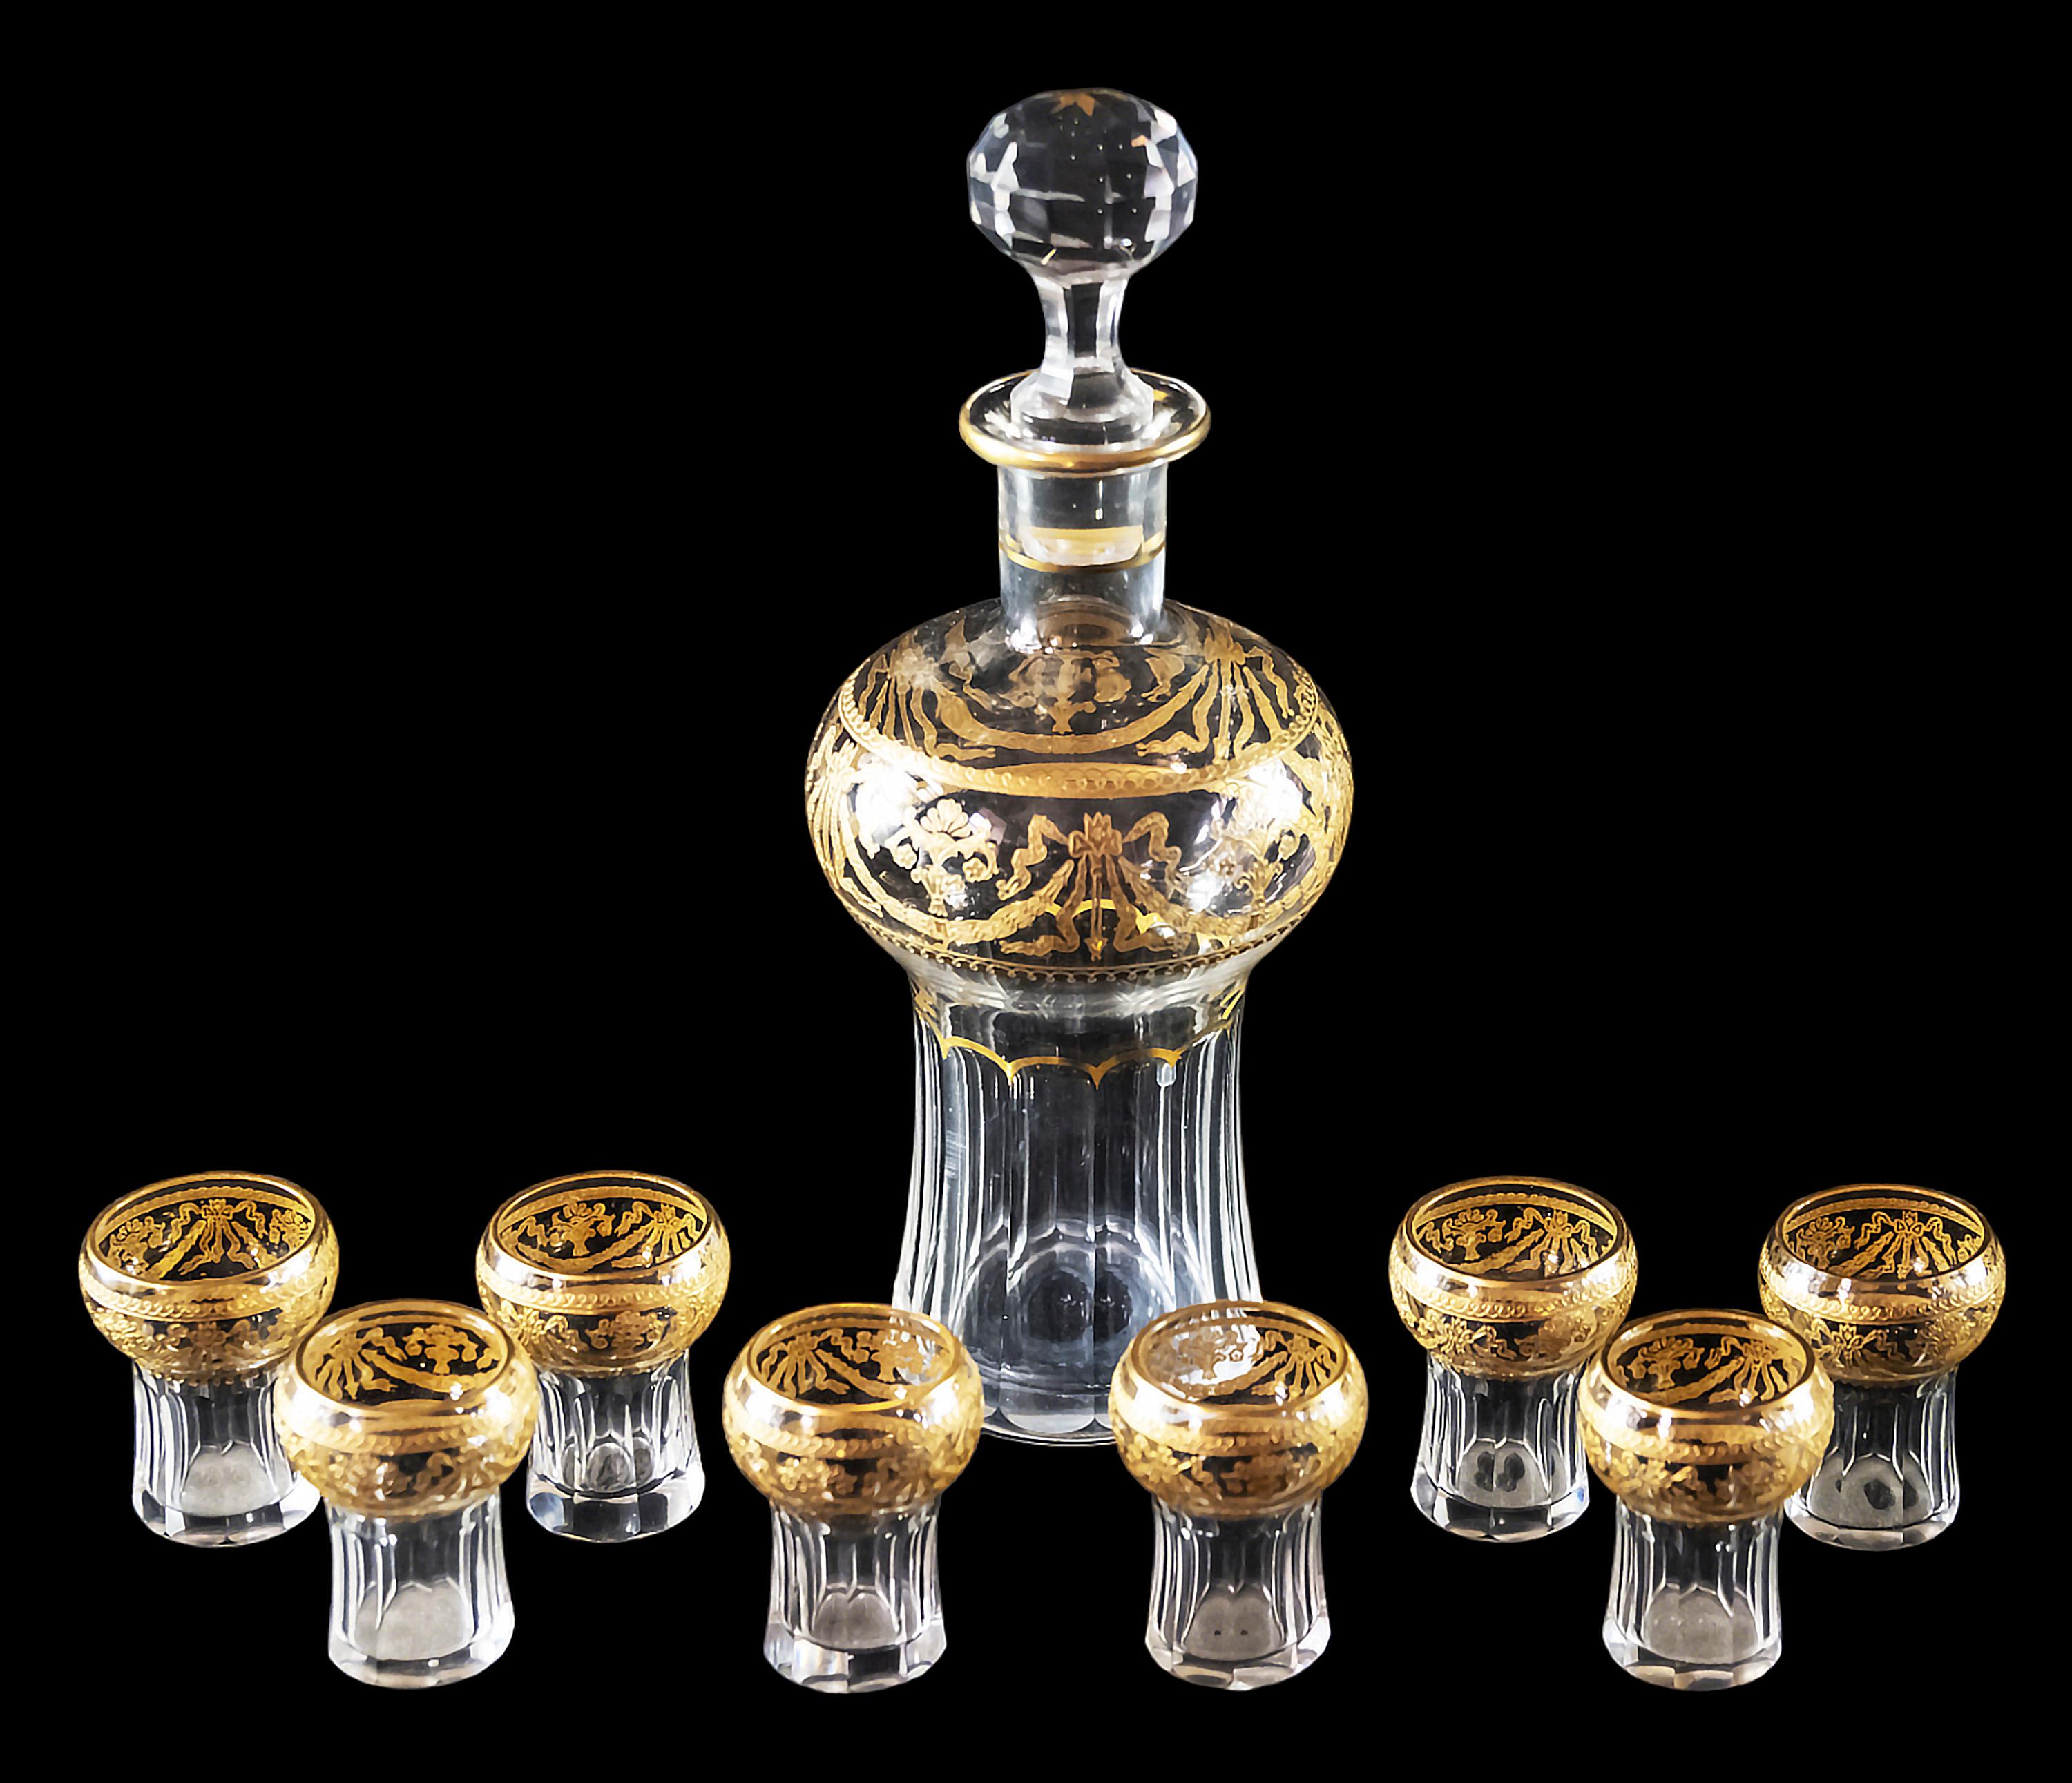 Antique French Saint Louis cut crystal liqueur set finely decorated with gilded ornaments, that includes 8 pieces of liqueur glasses, 1 piece decanter/carafe.
Model 738, 1916 catalog.
Before 1936, the old productions were not